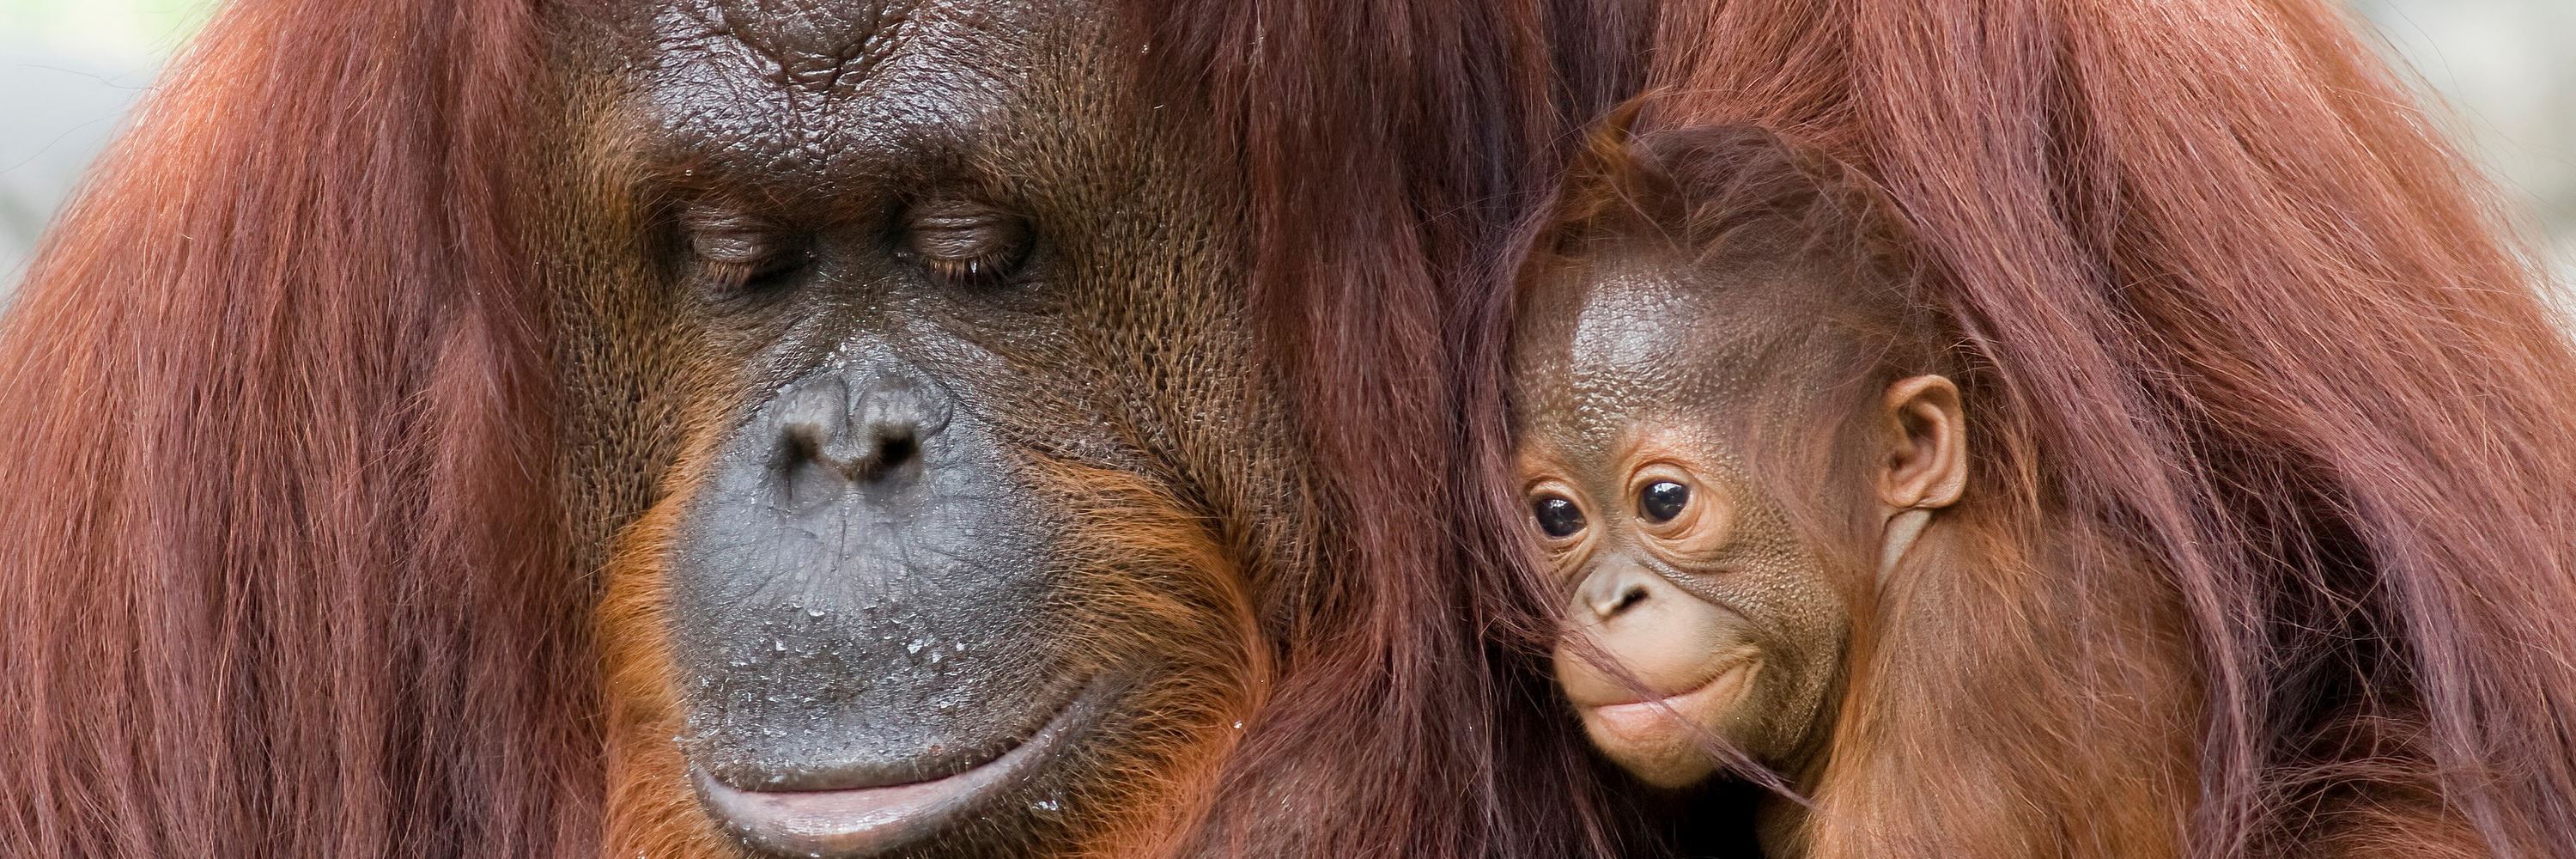 Where to see orangutan in Borneo | Audley Travel